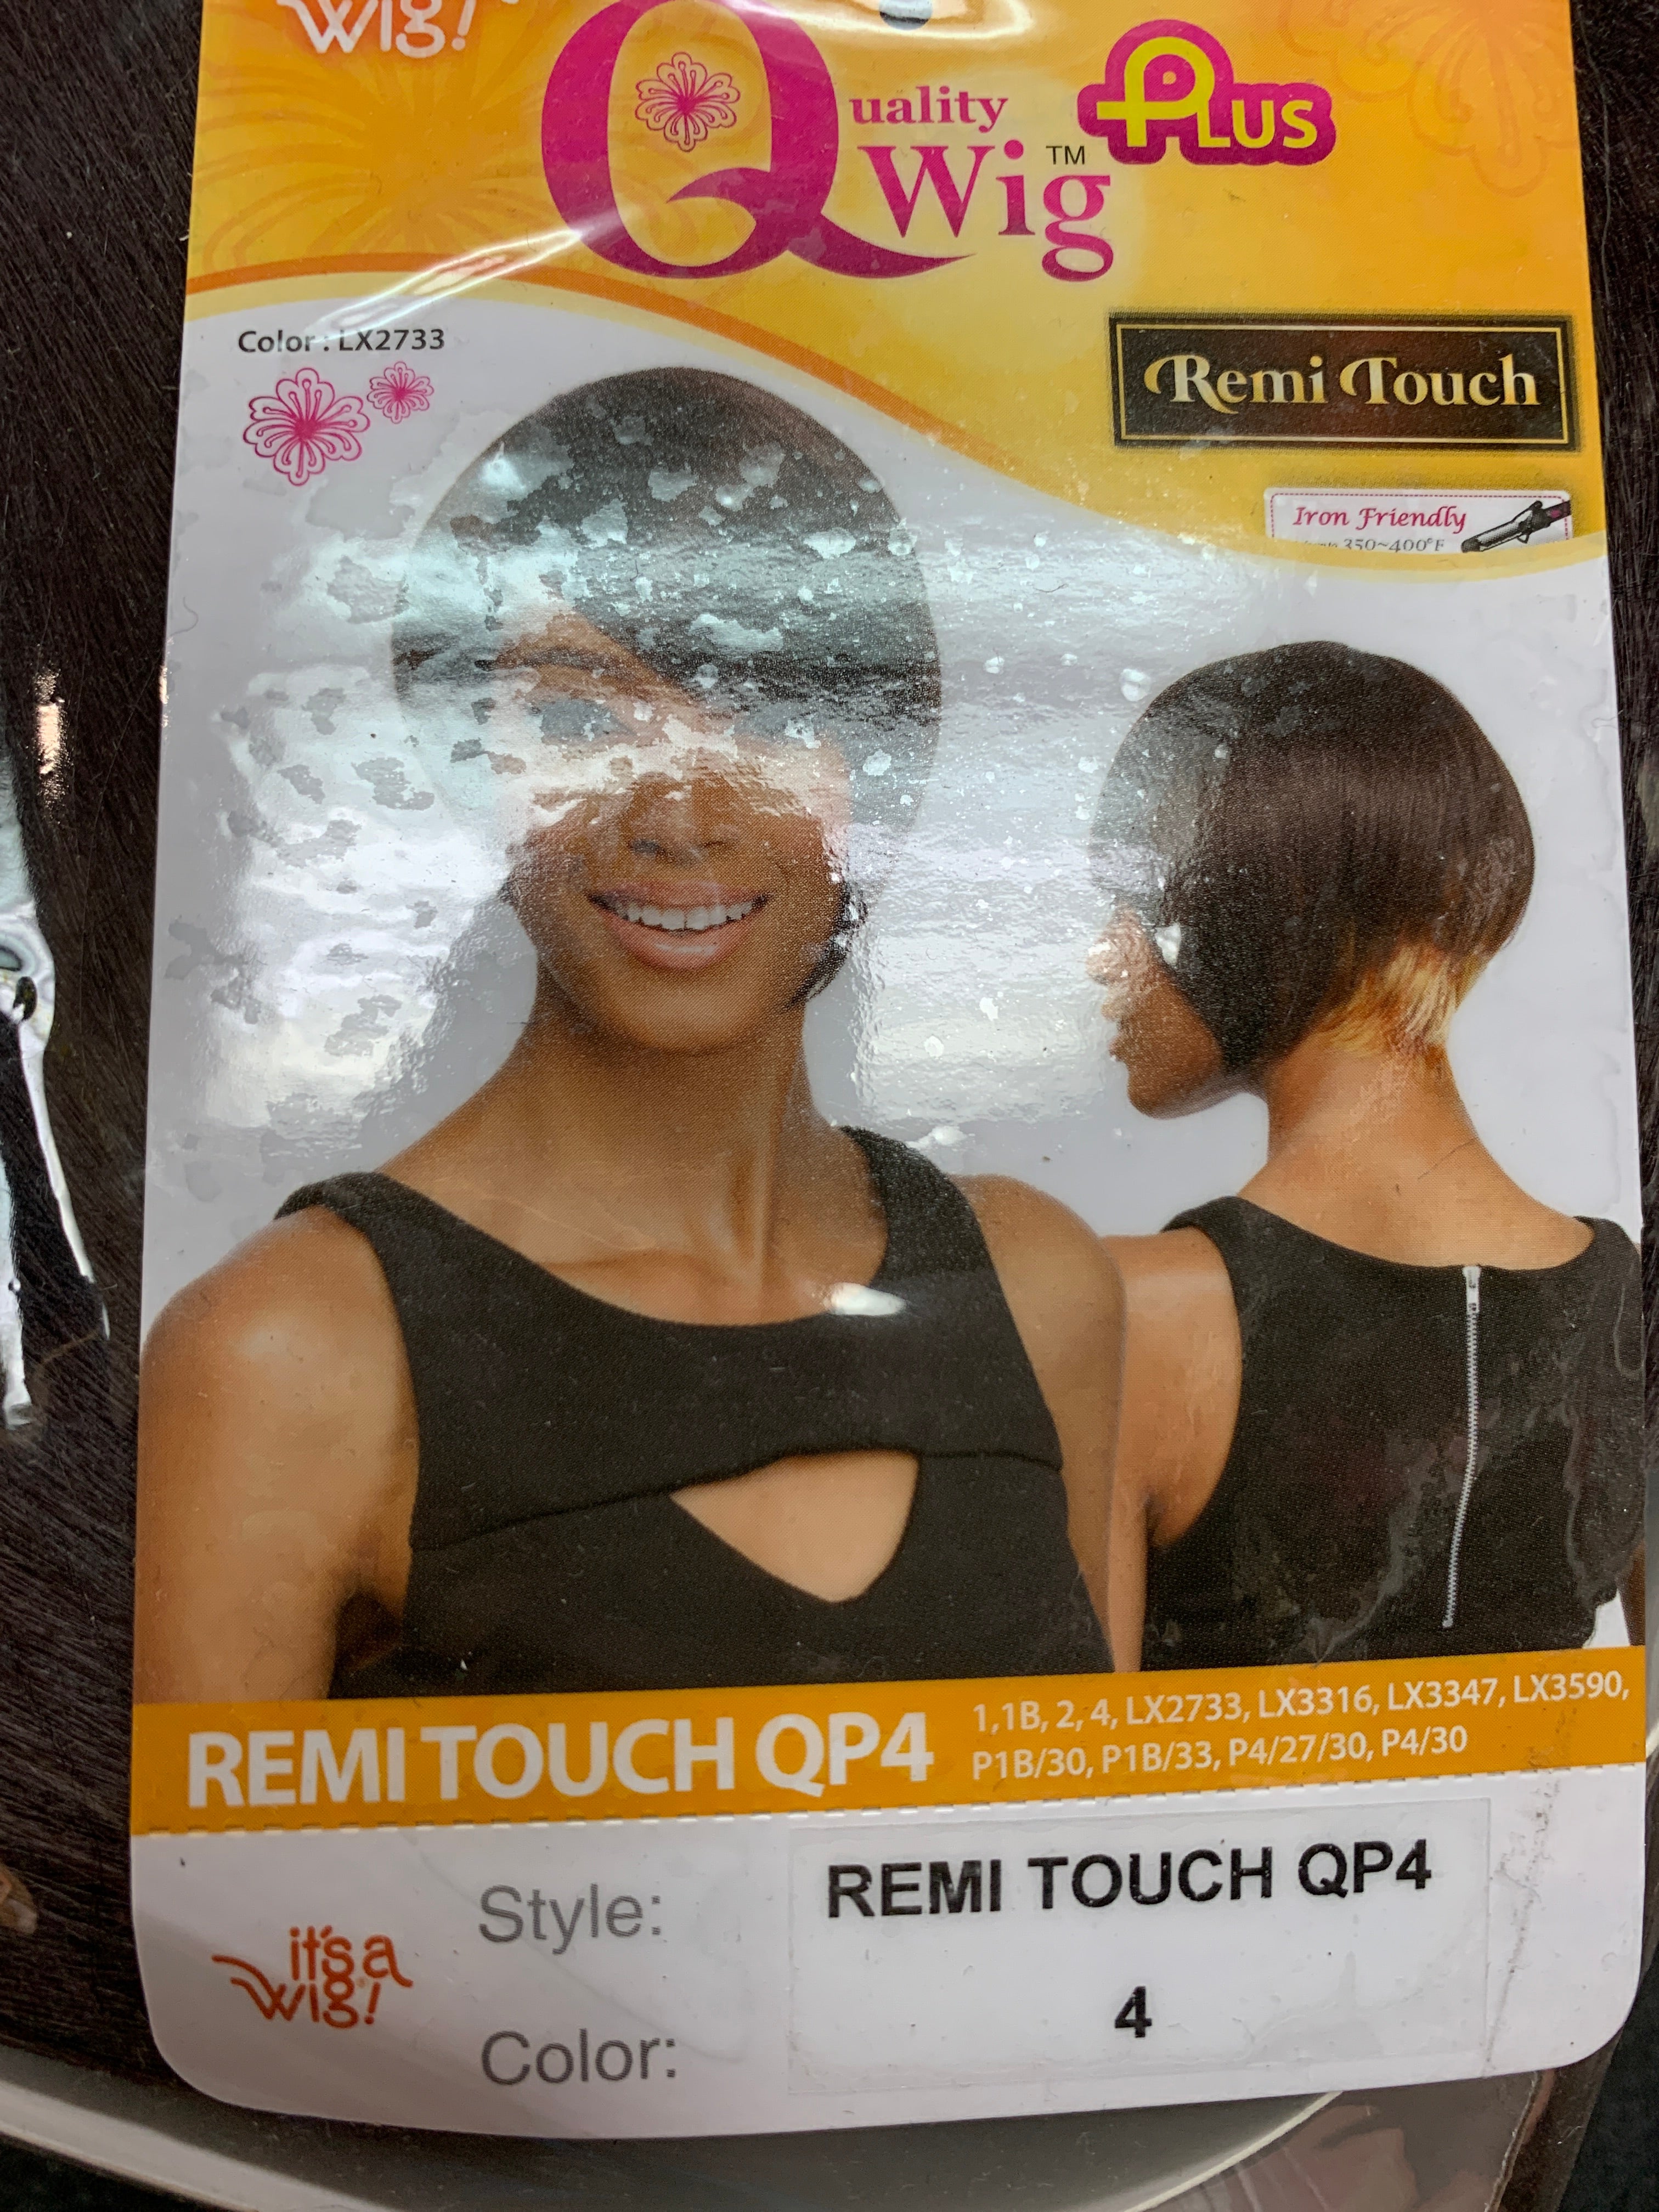 It’s a wig Remi touch op4